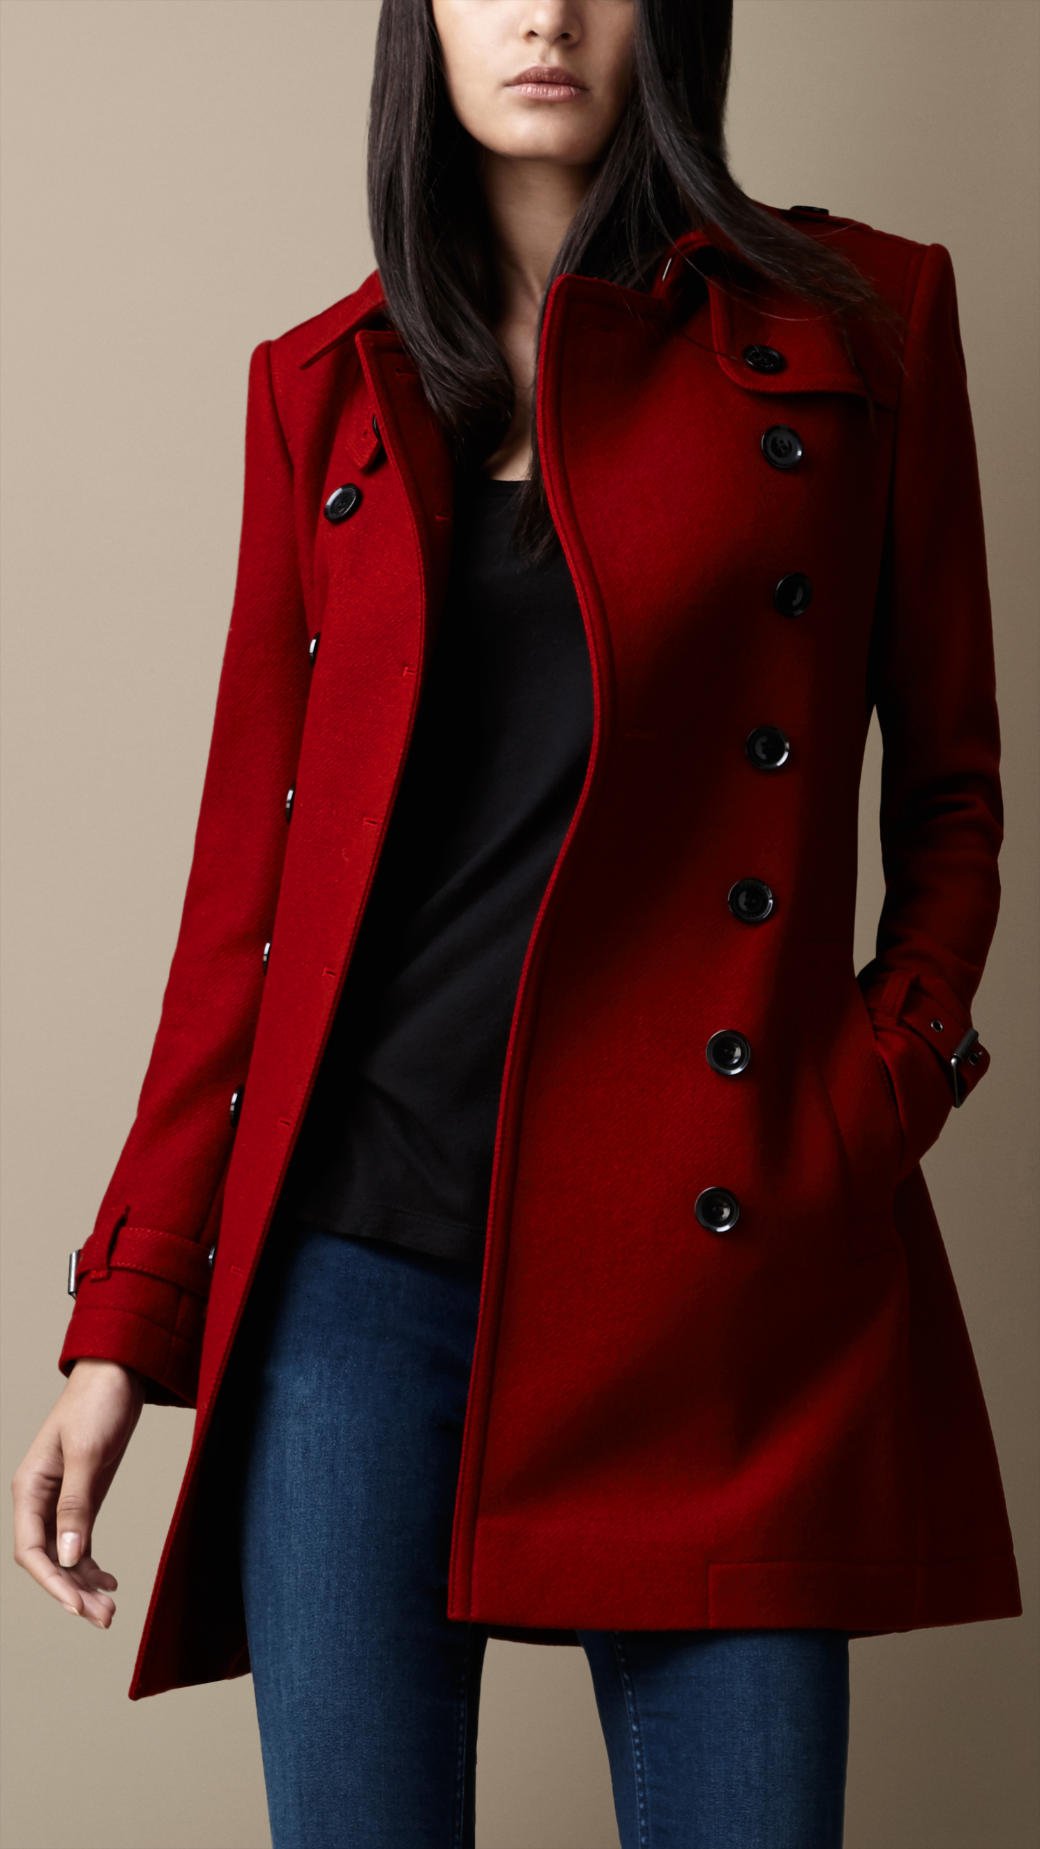 Lyst - Burberry Midlength Wool Blend Trench Coat in Red